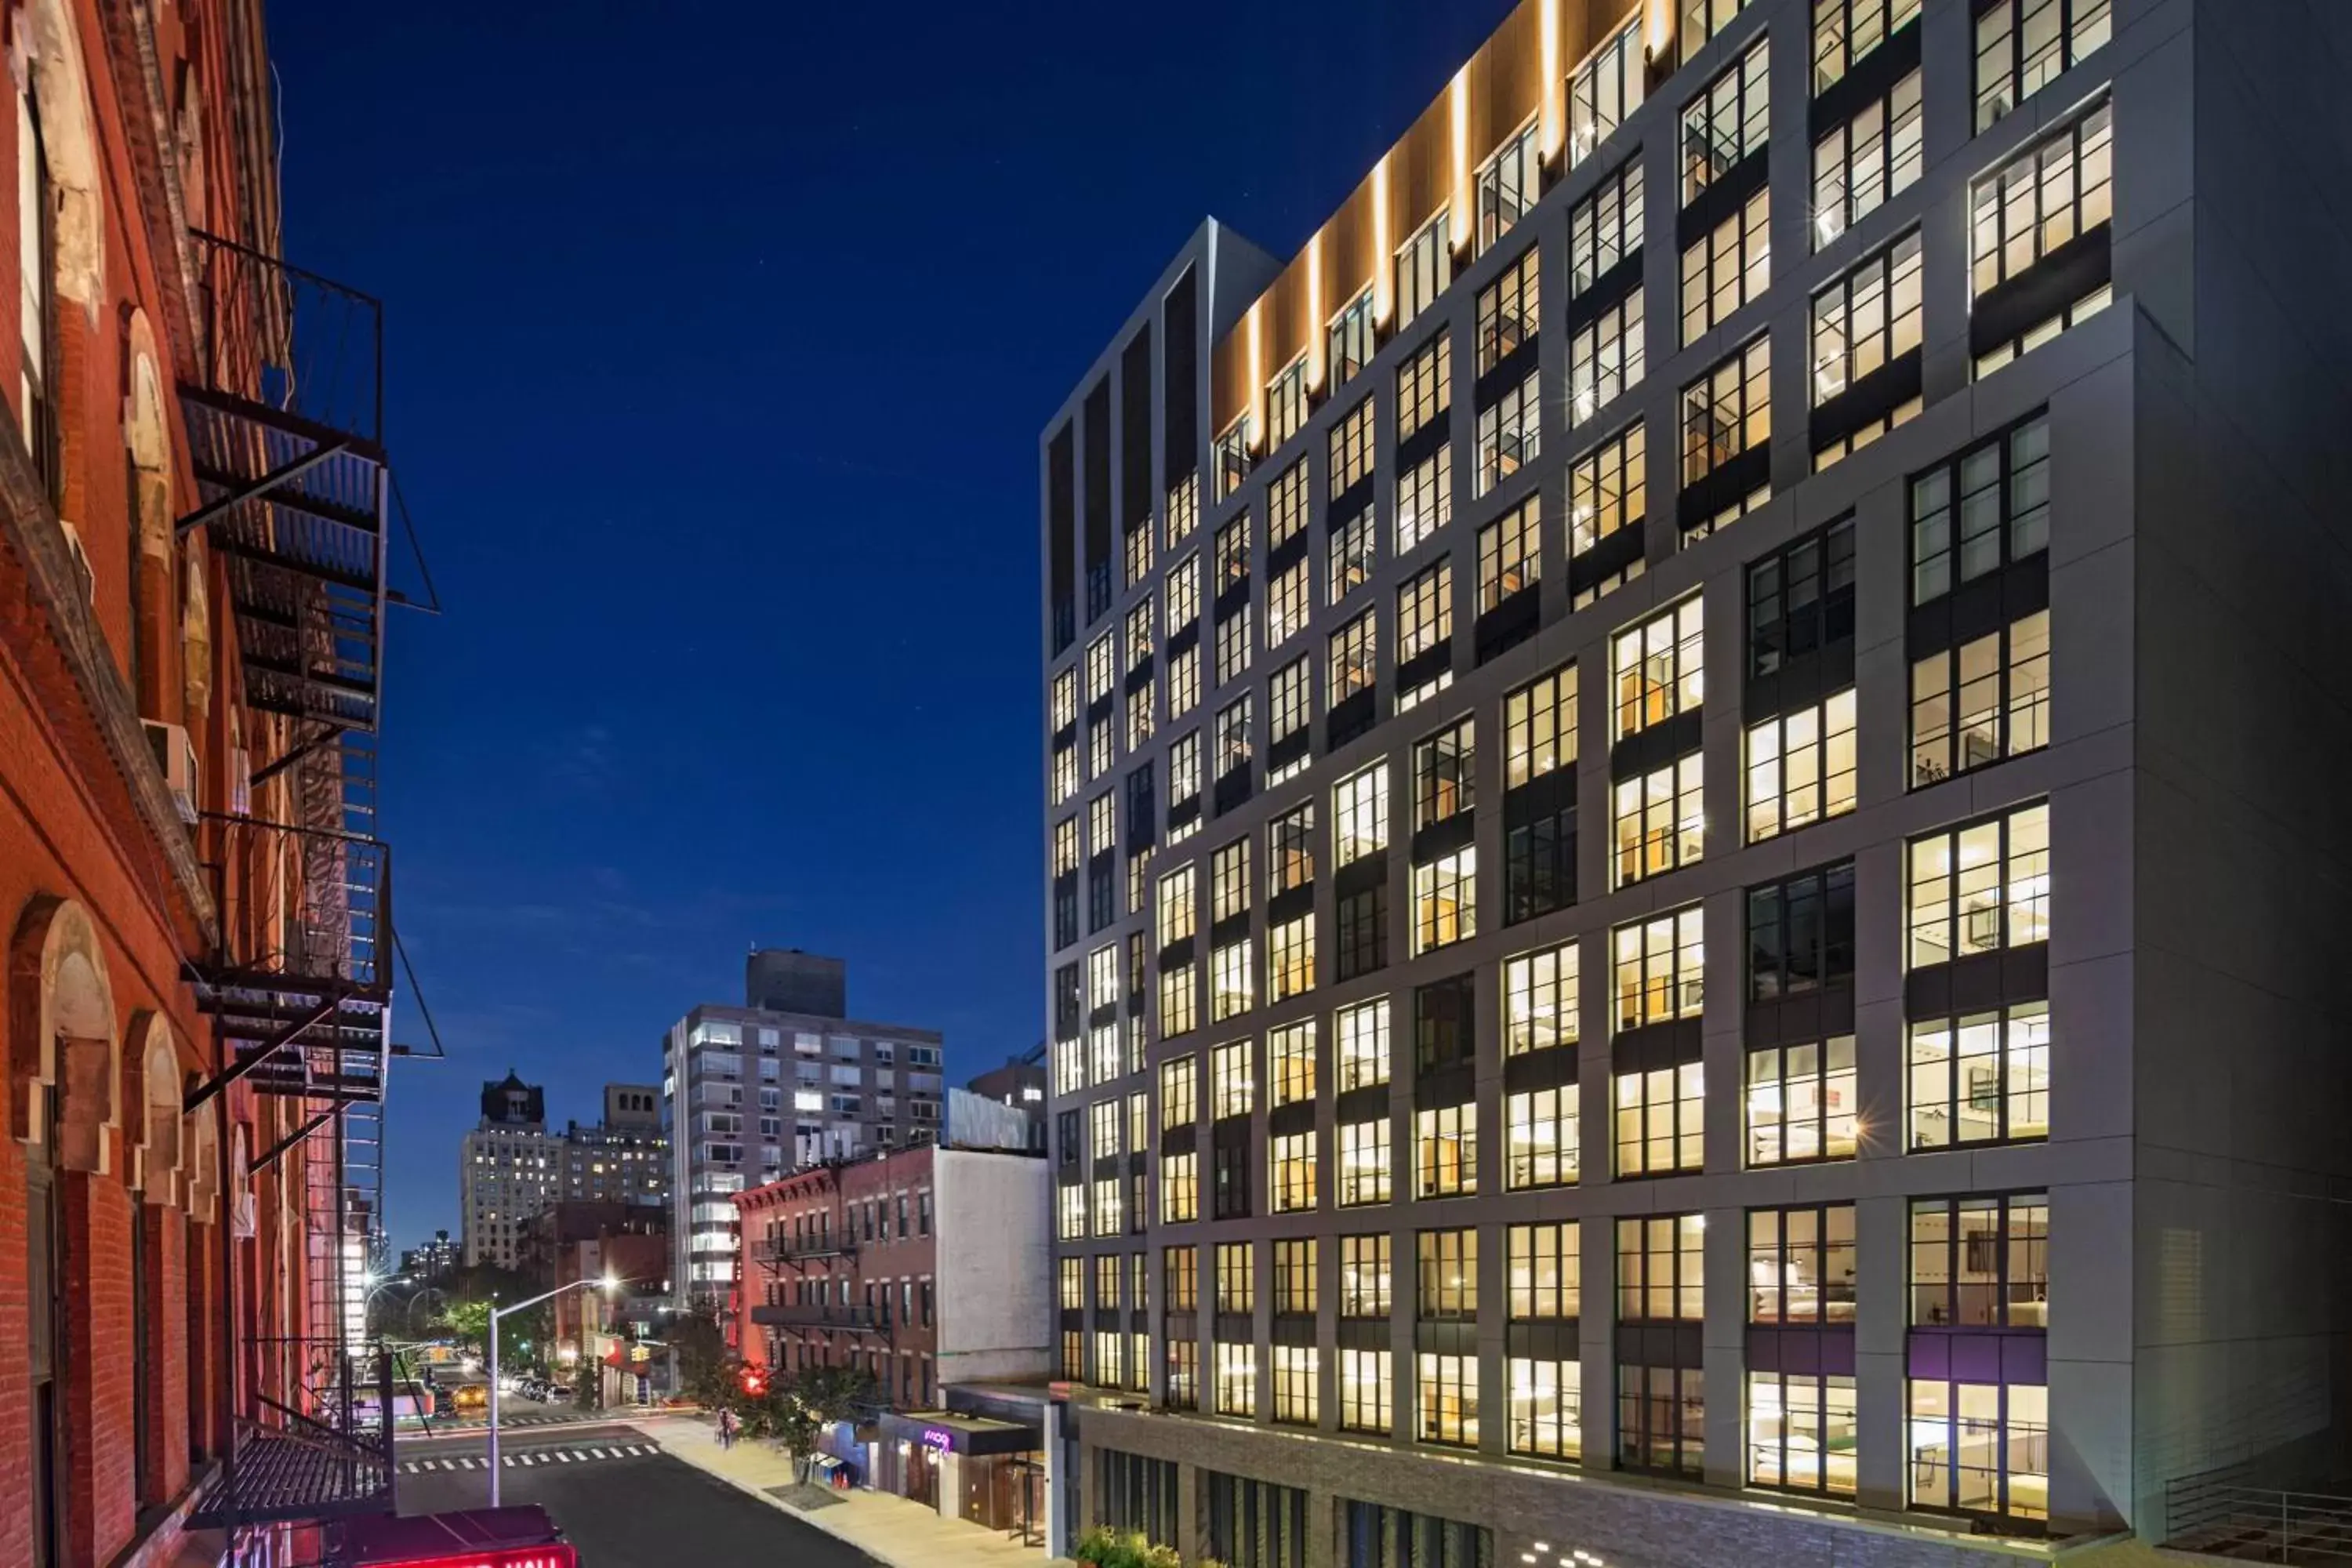 Property building in Moxy NYC East Village